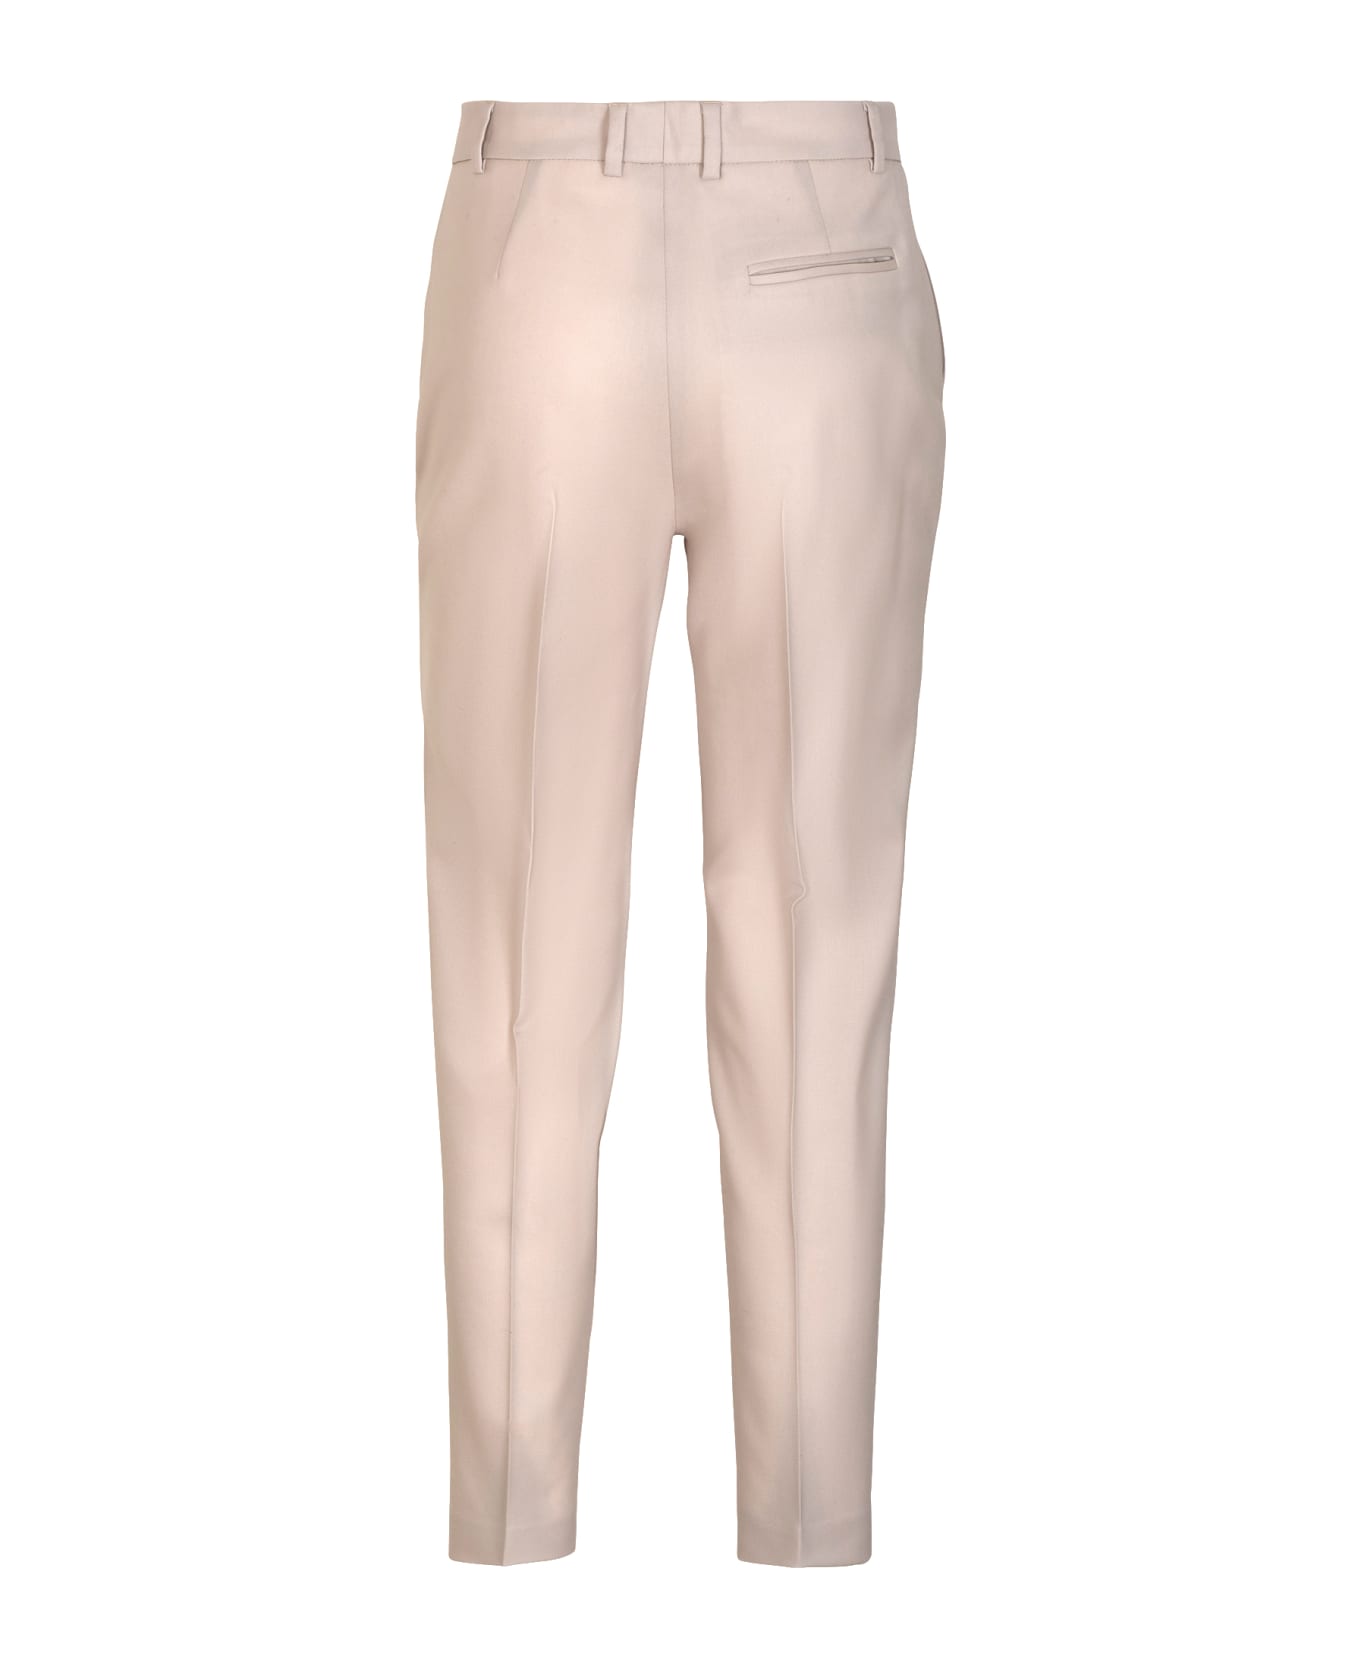 QL2 Concealed Fitted Vervet Trousers - Canvas